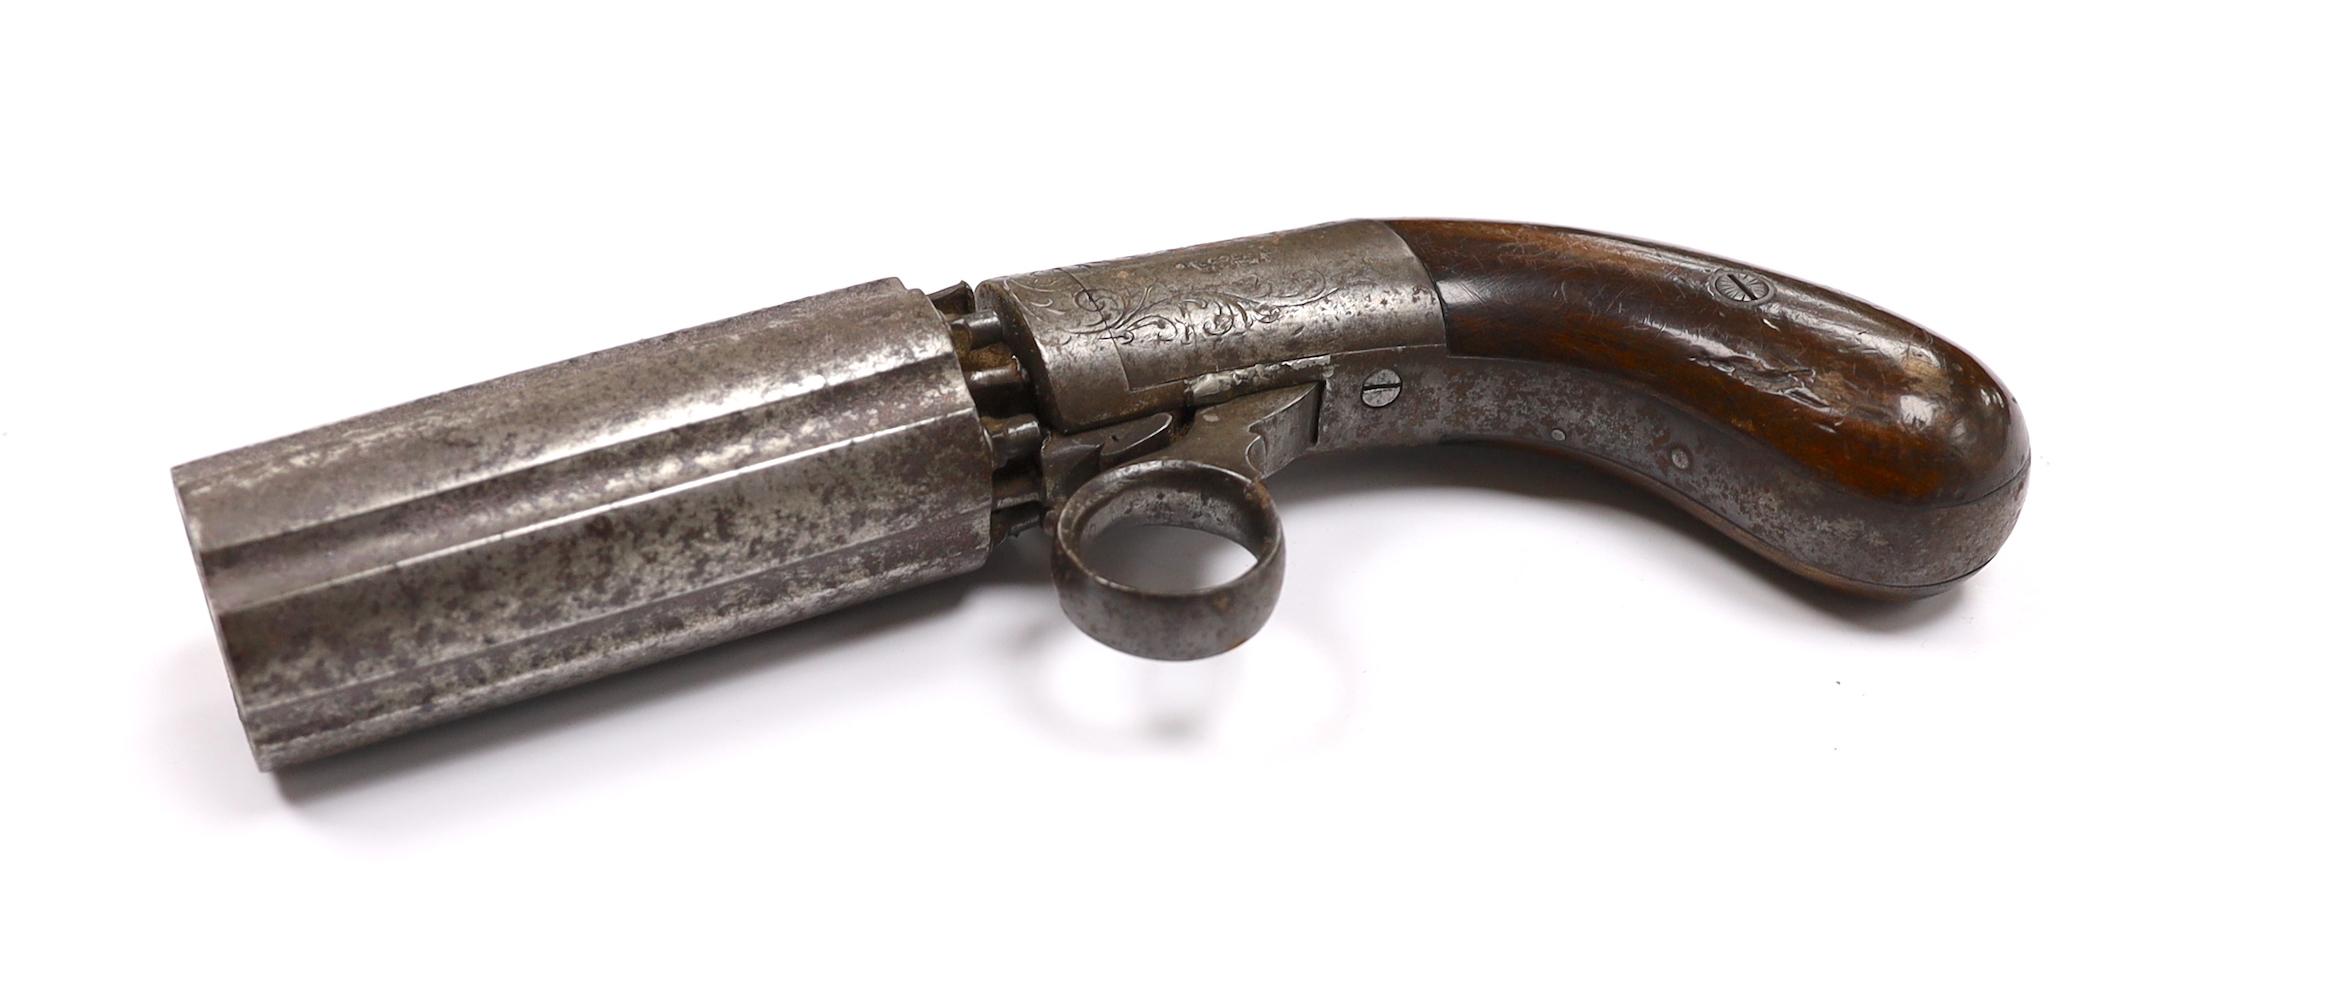 A 19th century, six barrel under action percussion pistol, with engraved lock and walnut grip, stamped ‘Coopers patent’, barrel 8.6cm